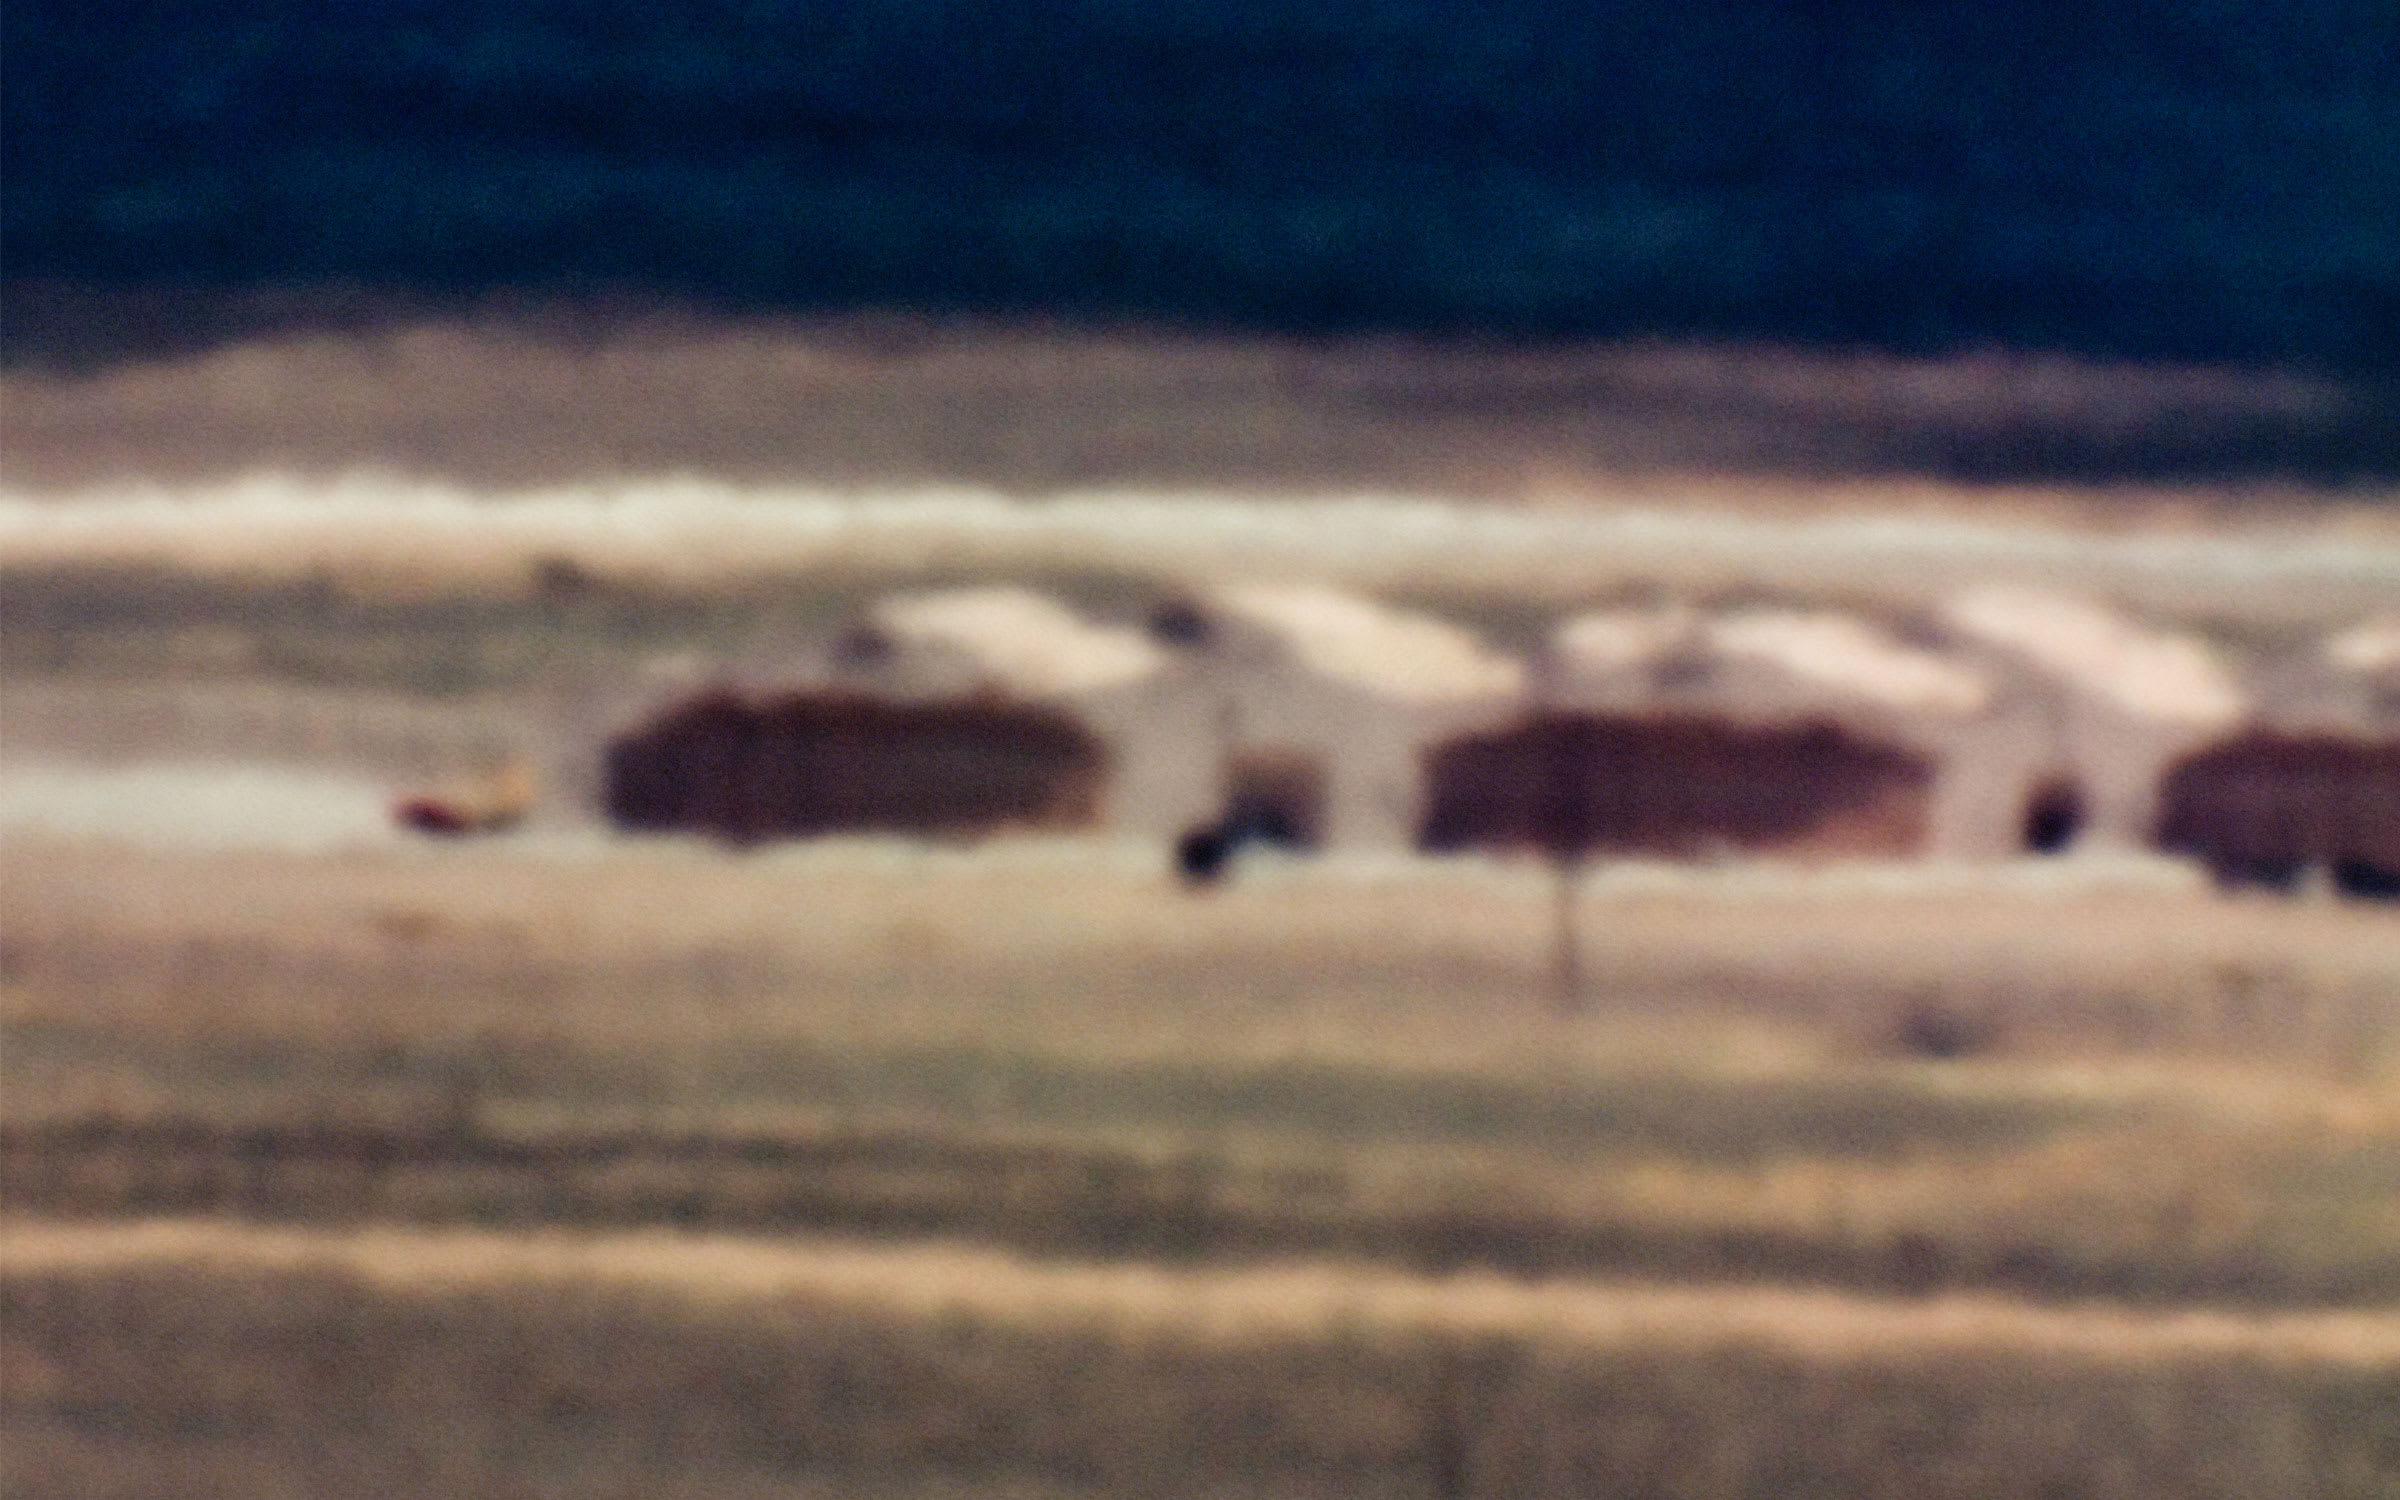 Trevor Paglen, Canyon Hangars and Unidentified Vehicle; Tonopah Test Range, NV; Distance approx. 18 miles; 12:45 pm, 2006. Courtesy of the artist, Metro Pictures, New York, Altman Siegel, San Francisco.